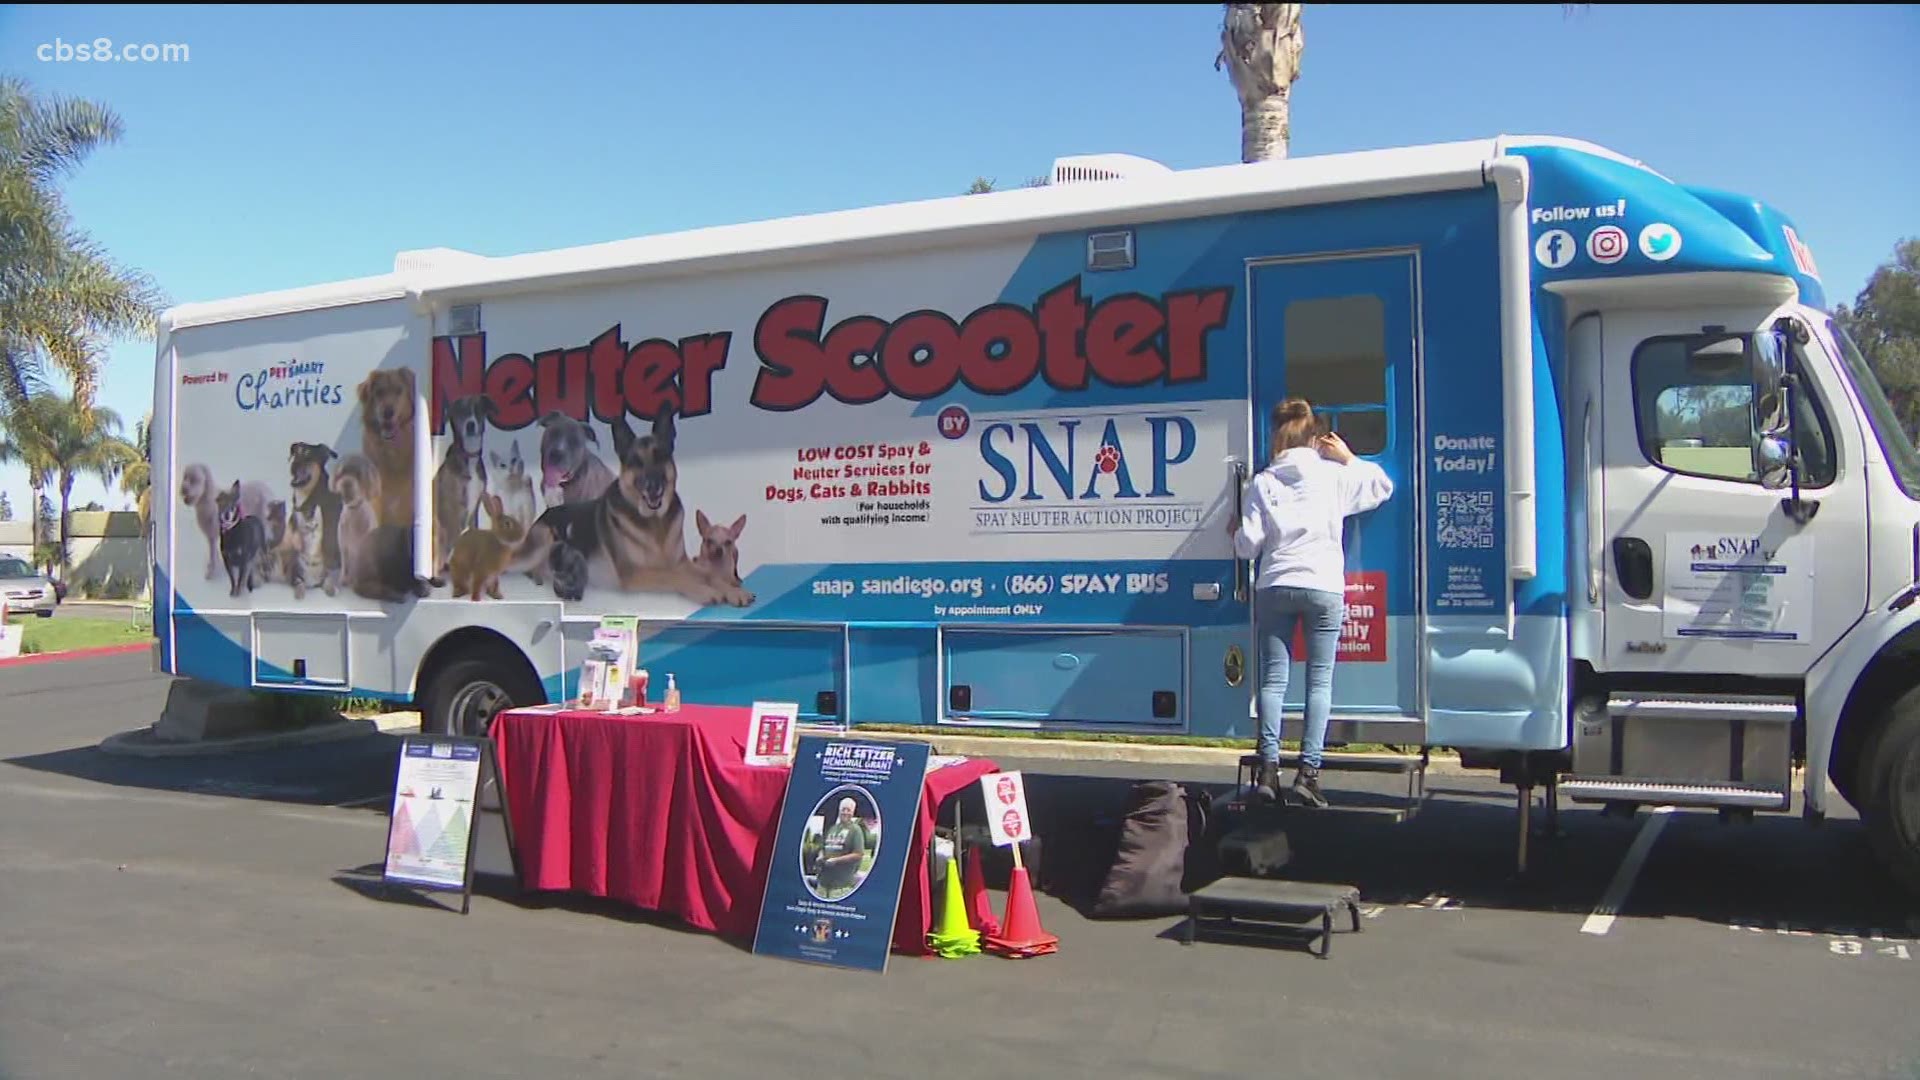 SNAP has “fixed” nearly 68,000 dogs, cats and rabbits aboard their mobile clinics called the Neuter Scooter. On Saturday the group had twenty-nine animals on board.